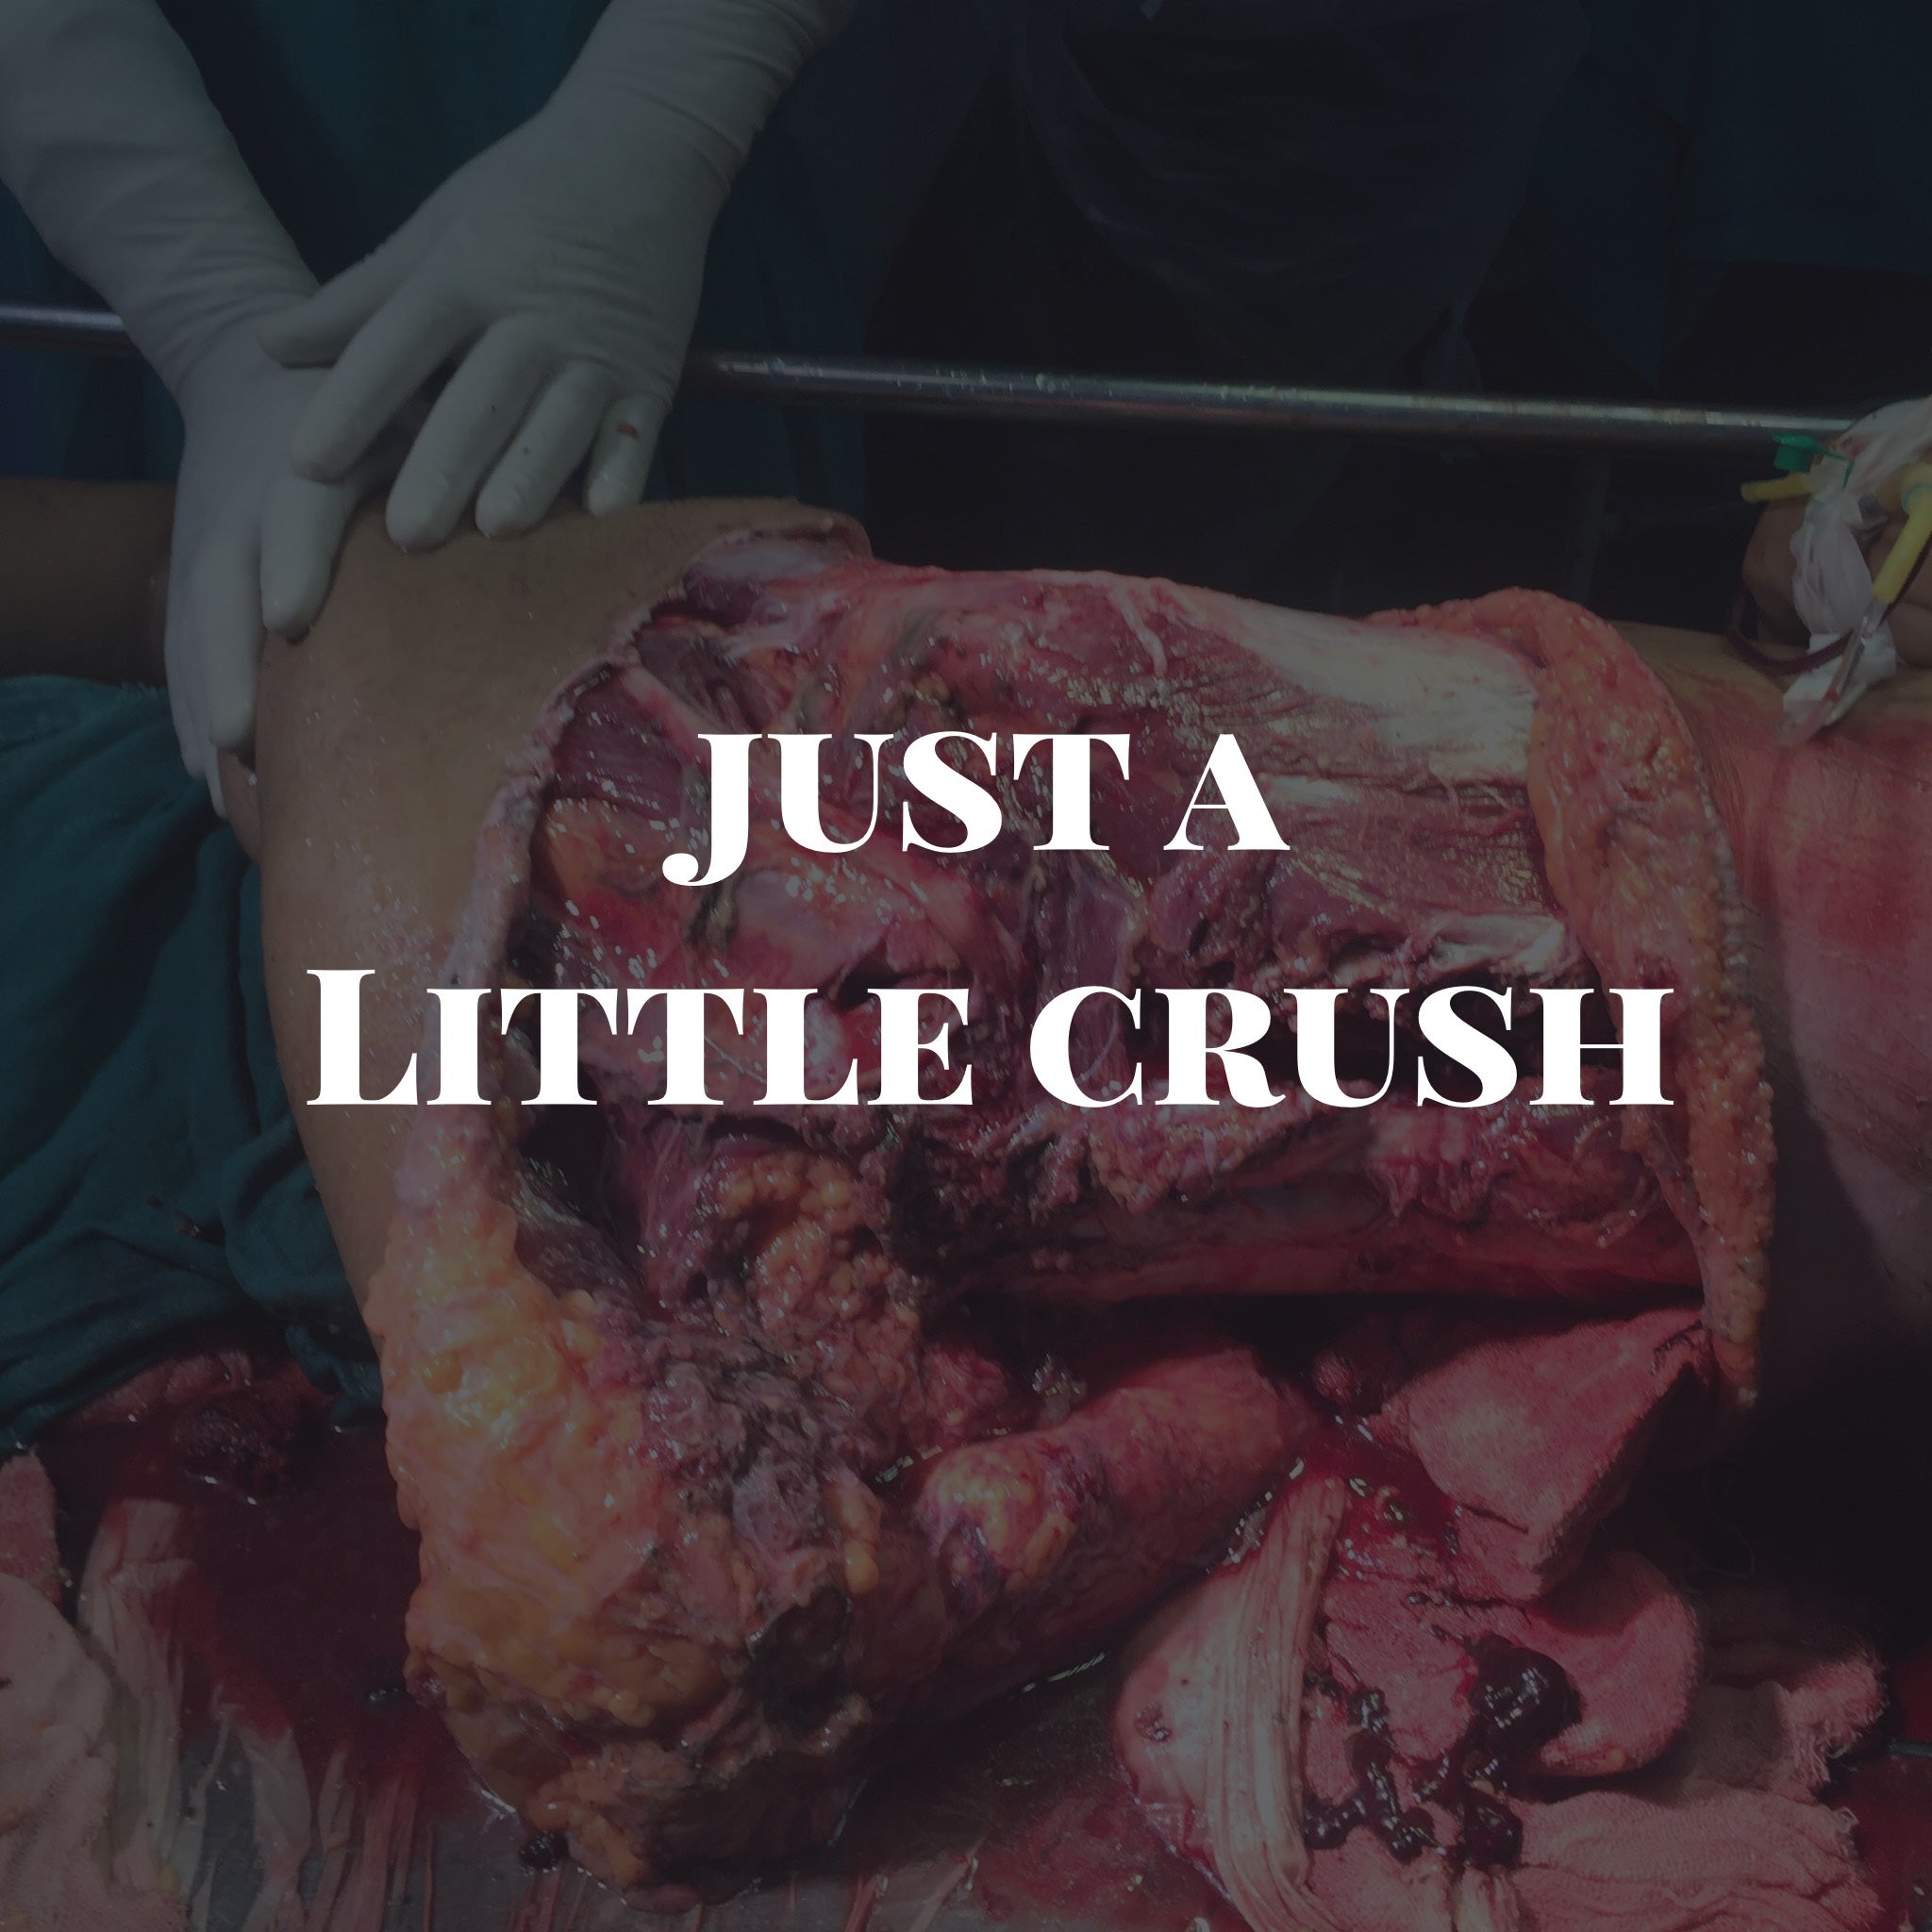 It’s Just, a little Crush….